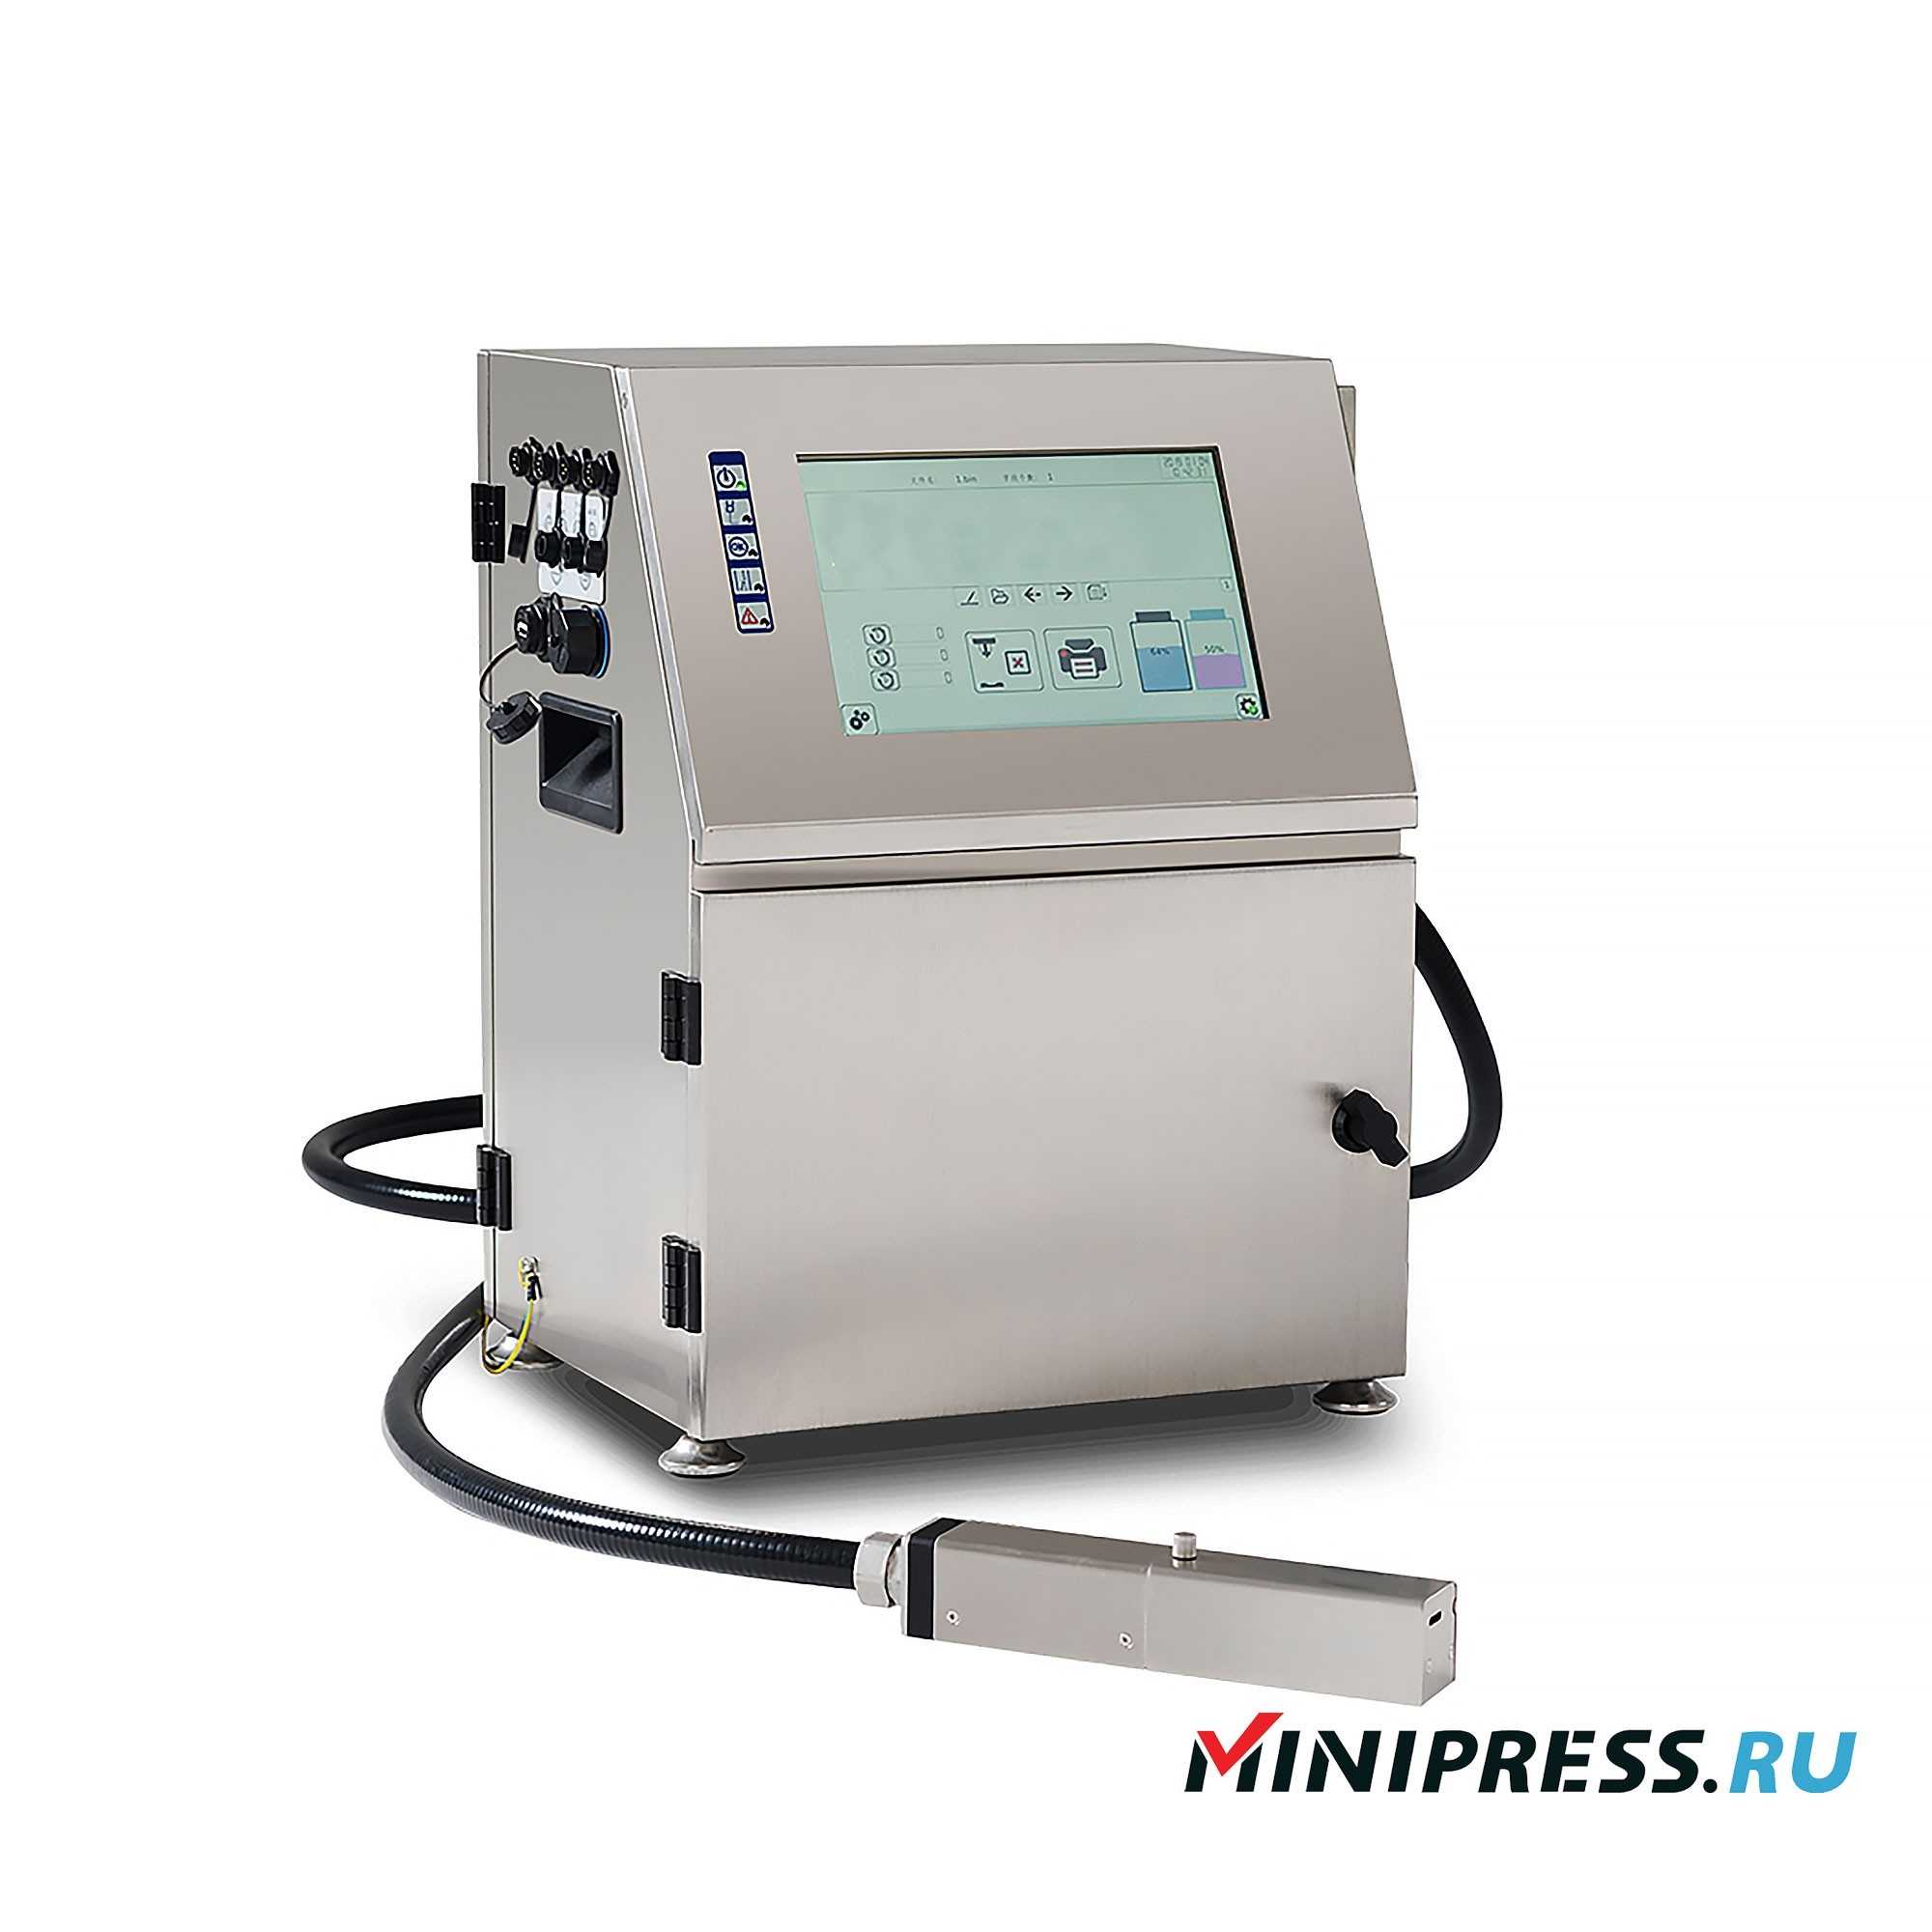 Industrial injekt printer for date and QR code printing LV-09